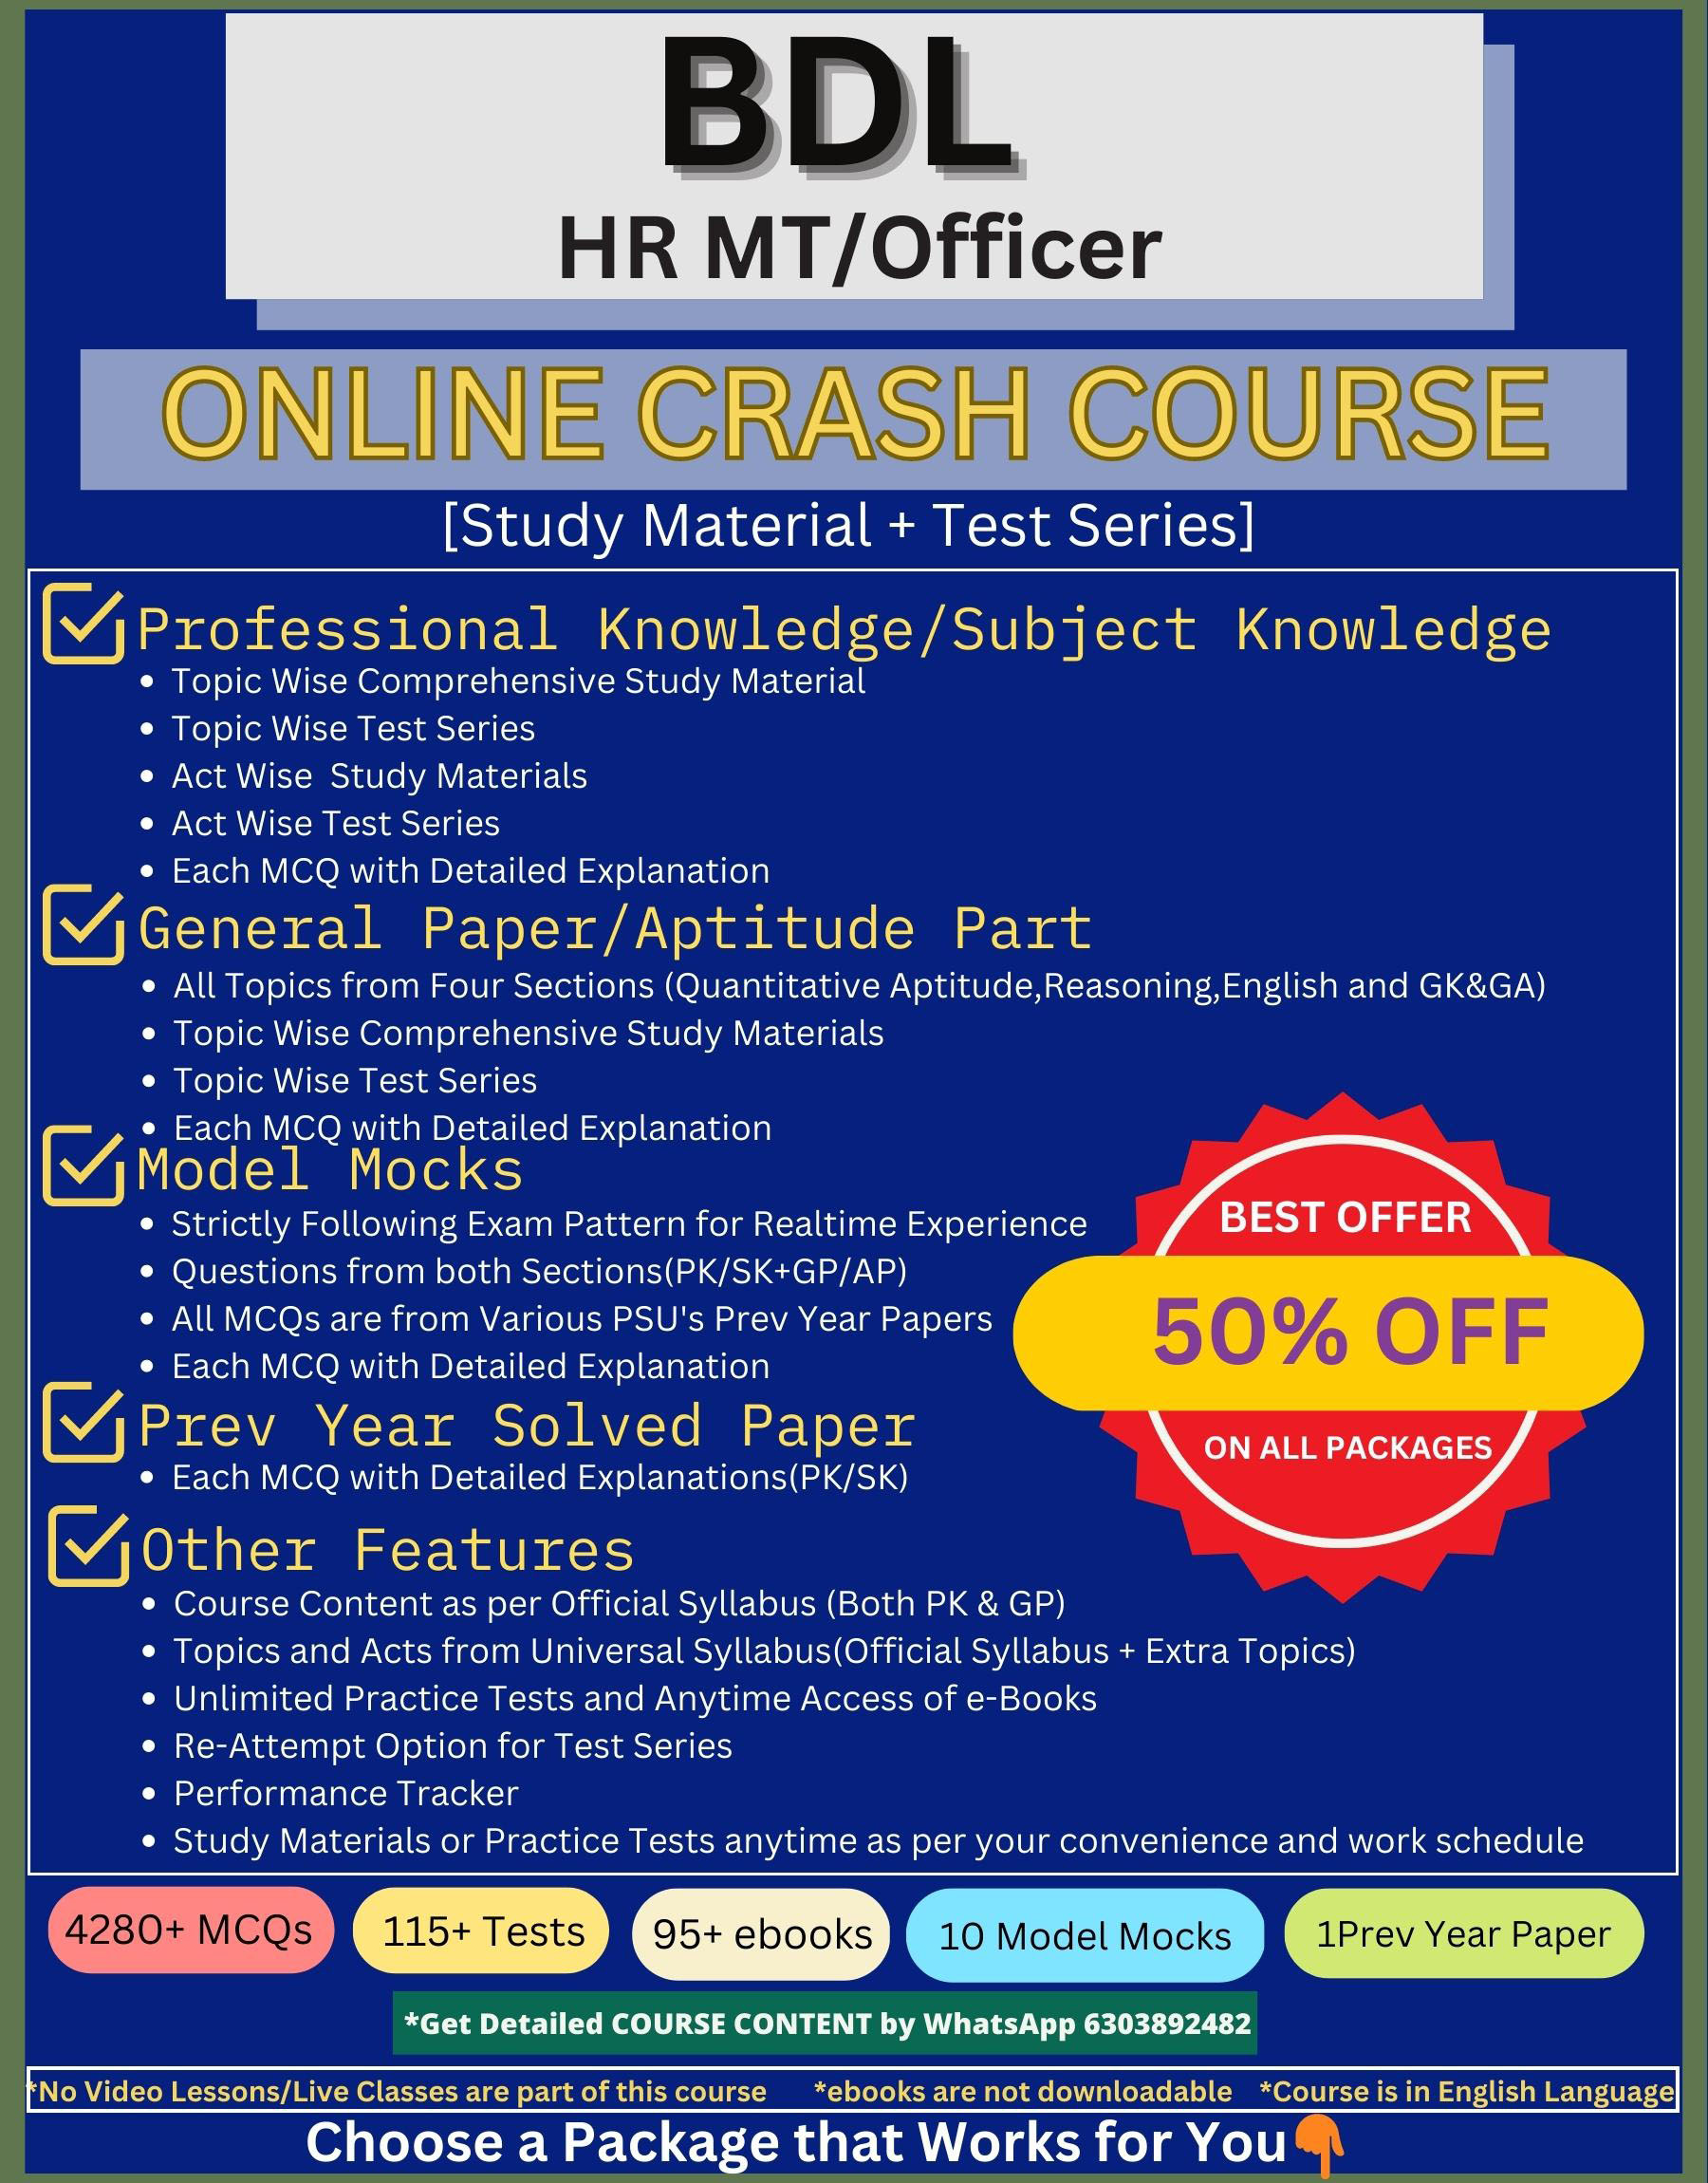 Online course with test series and study materials for Bharath Dynamics ltd BDL MT HR